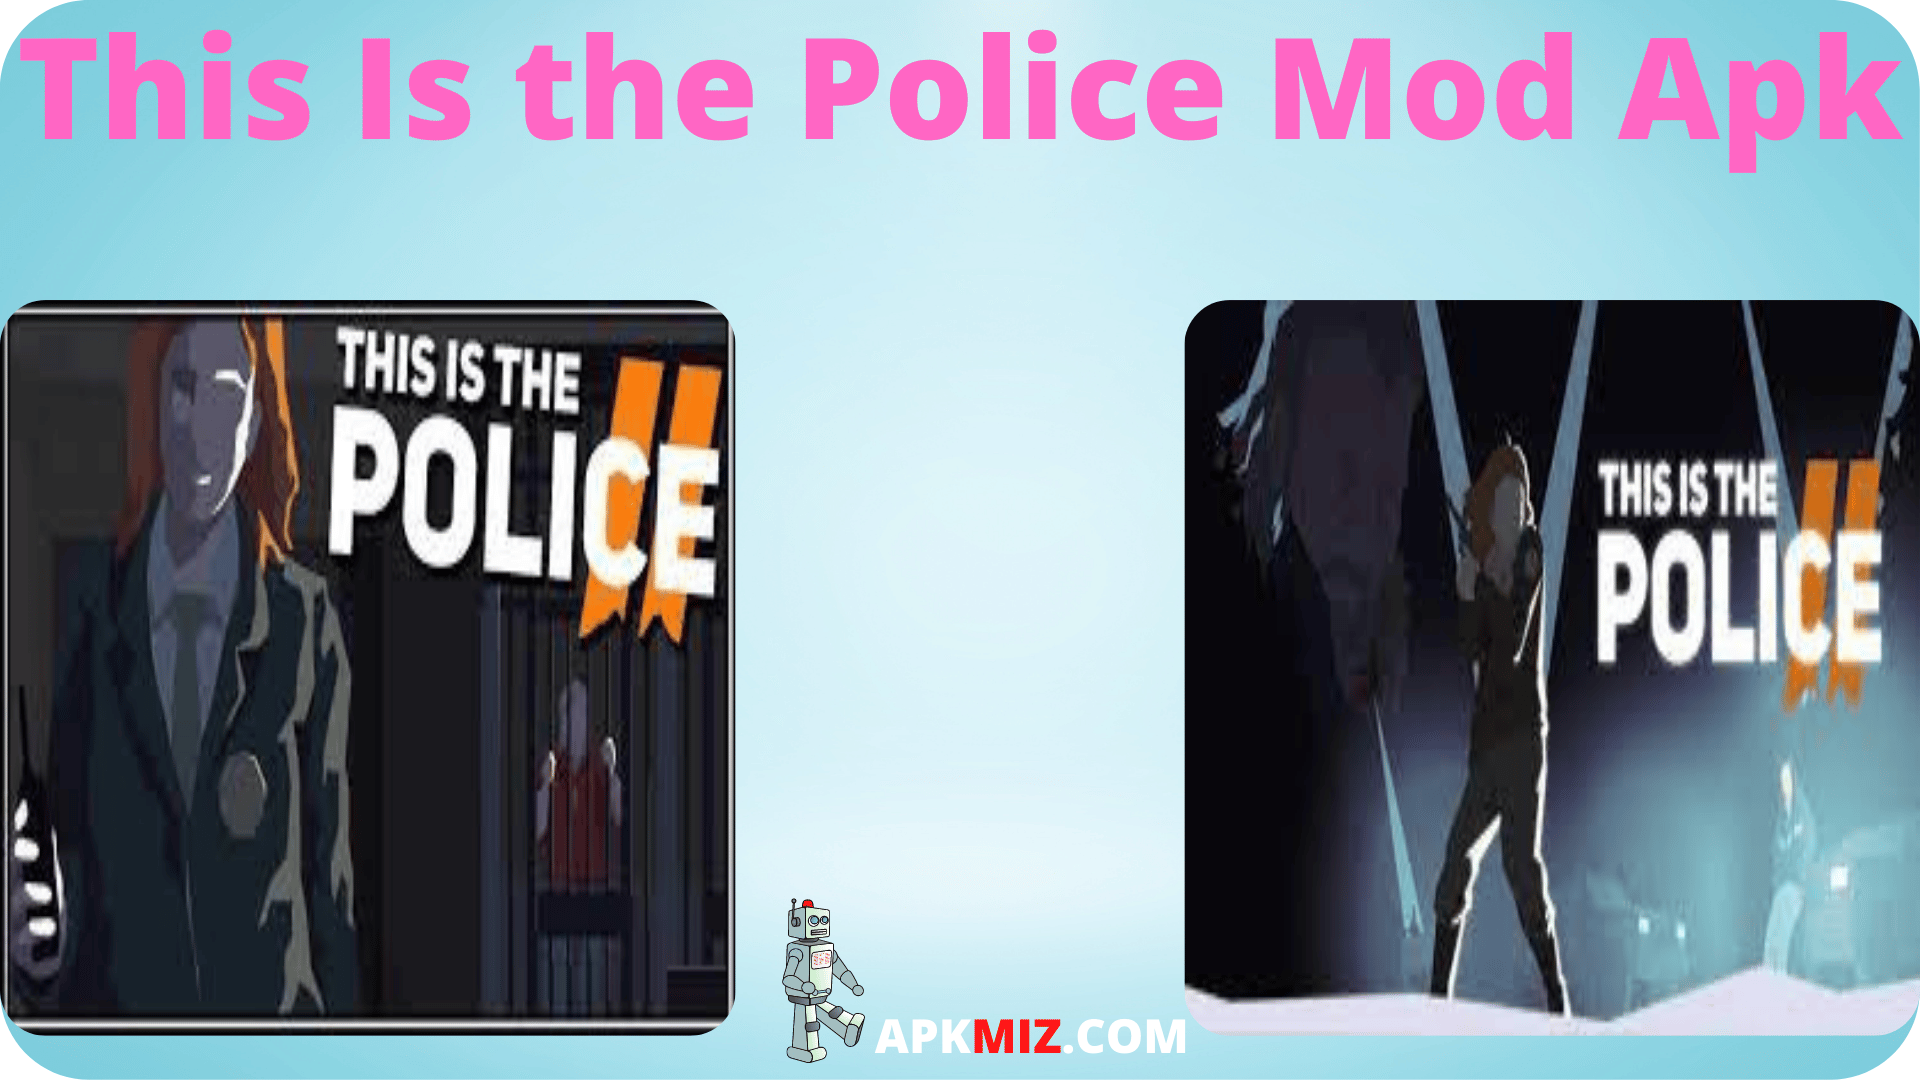 This Is the Police Mod Apk